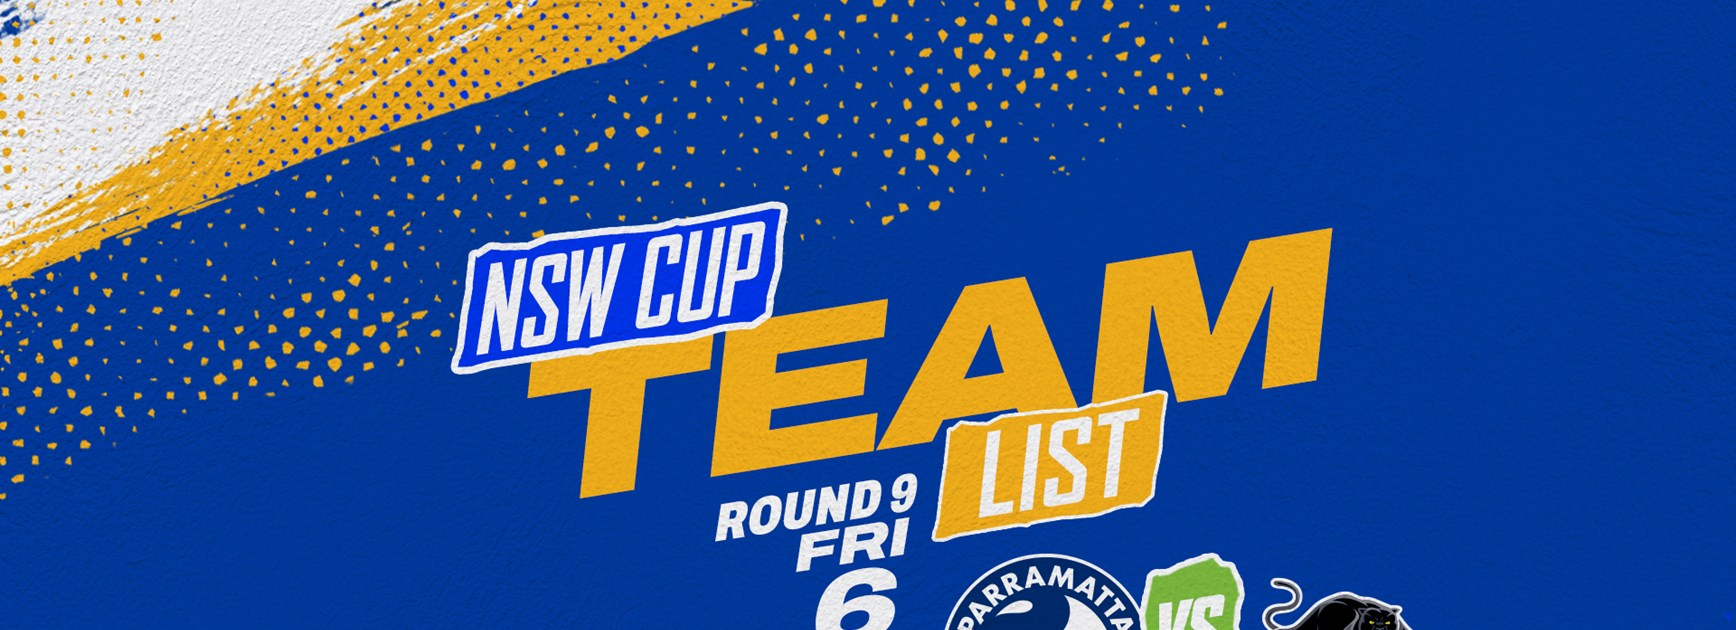 NSW Cup Team List - Panthers v Eels, Round Nine